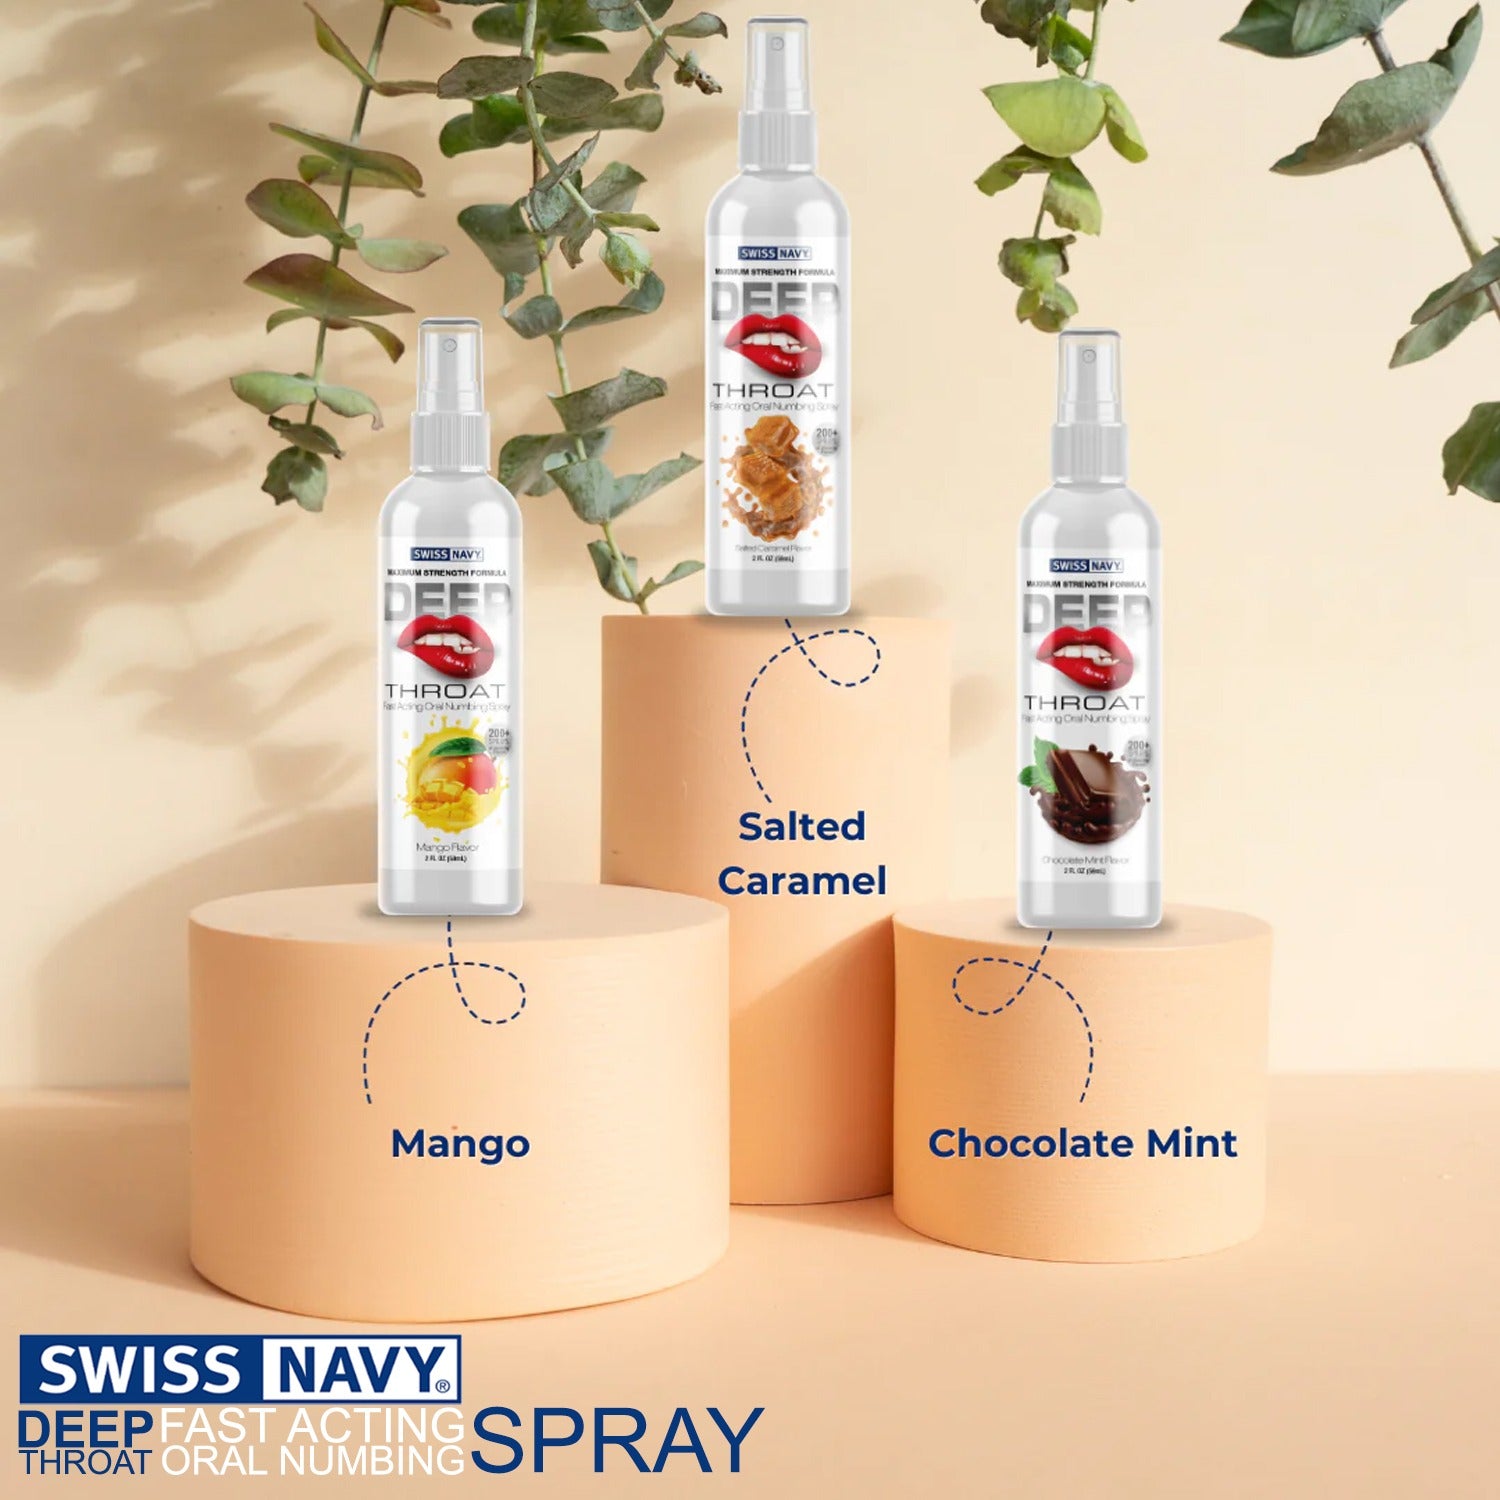 3 bottles of Swiss Navy Deep Throat Fast Acting Numbing Spray standing on display (from front to back): Mango Flavor, Chocolate Mint Flavor Salted Caramel Flavor. At the bottle is the Swiss Navy logo, product name: Deep Throat Fast Acting Oral Numbing Spray,